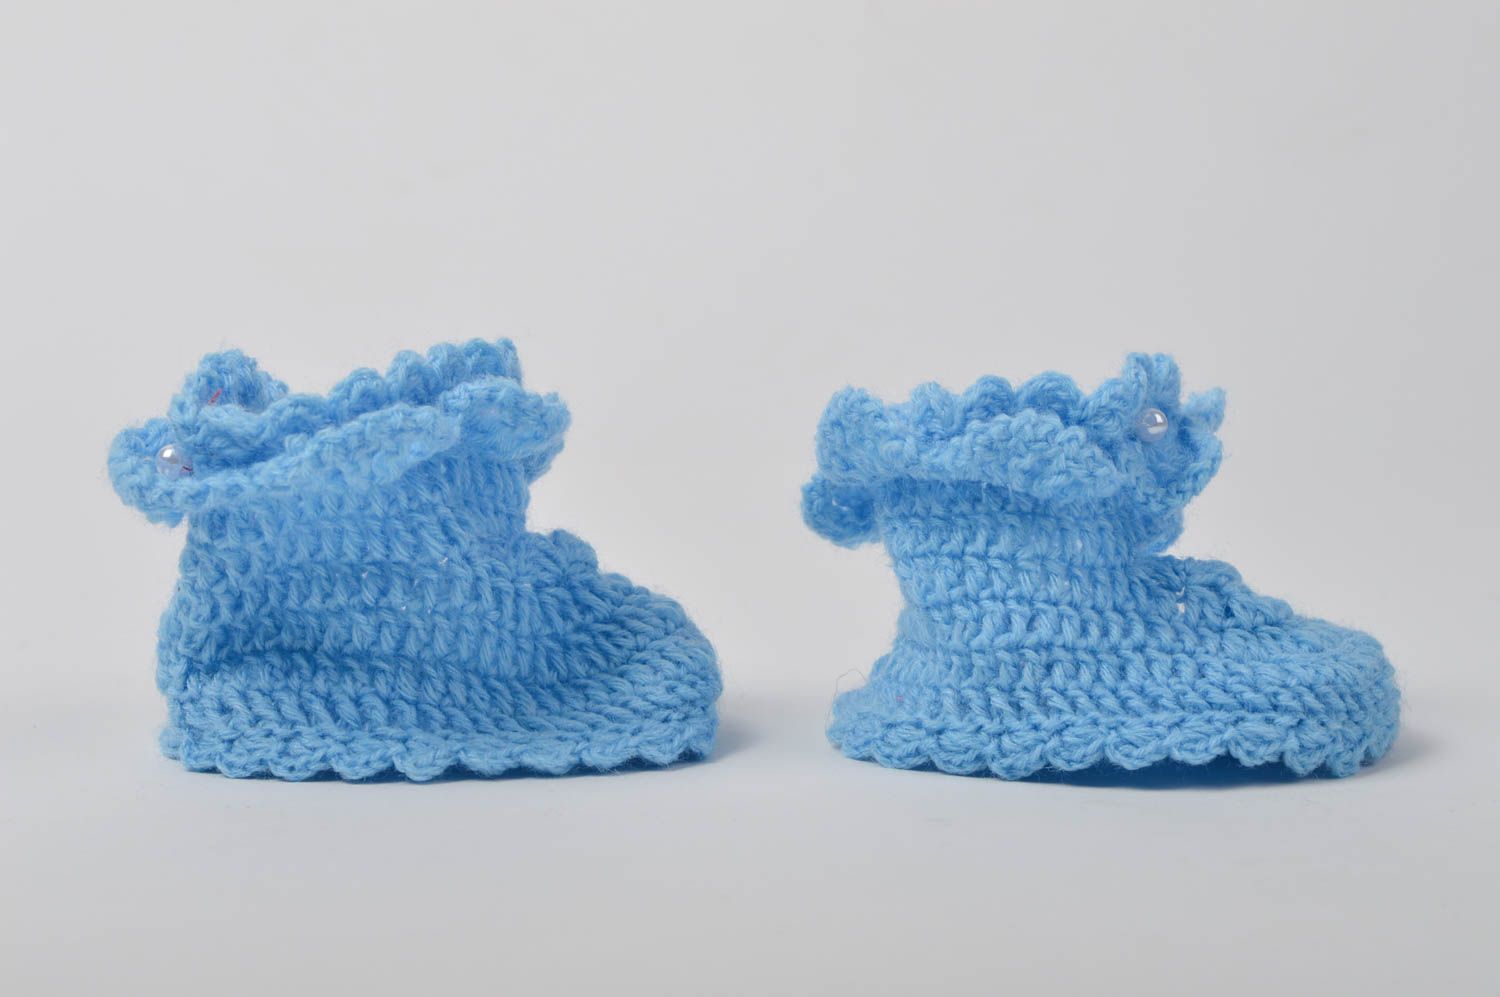 Crocheted booties for babies knitted socks crochet booties for baby unusual gift photo 3